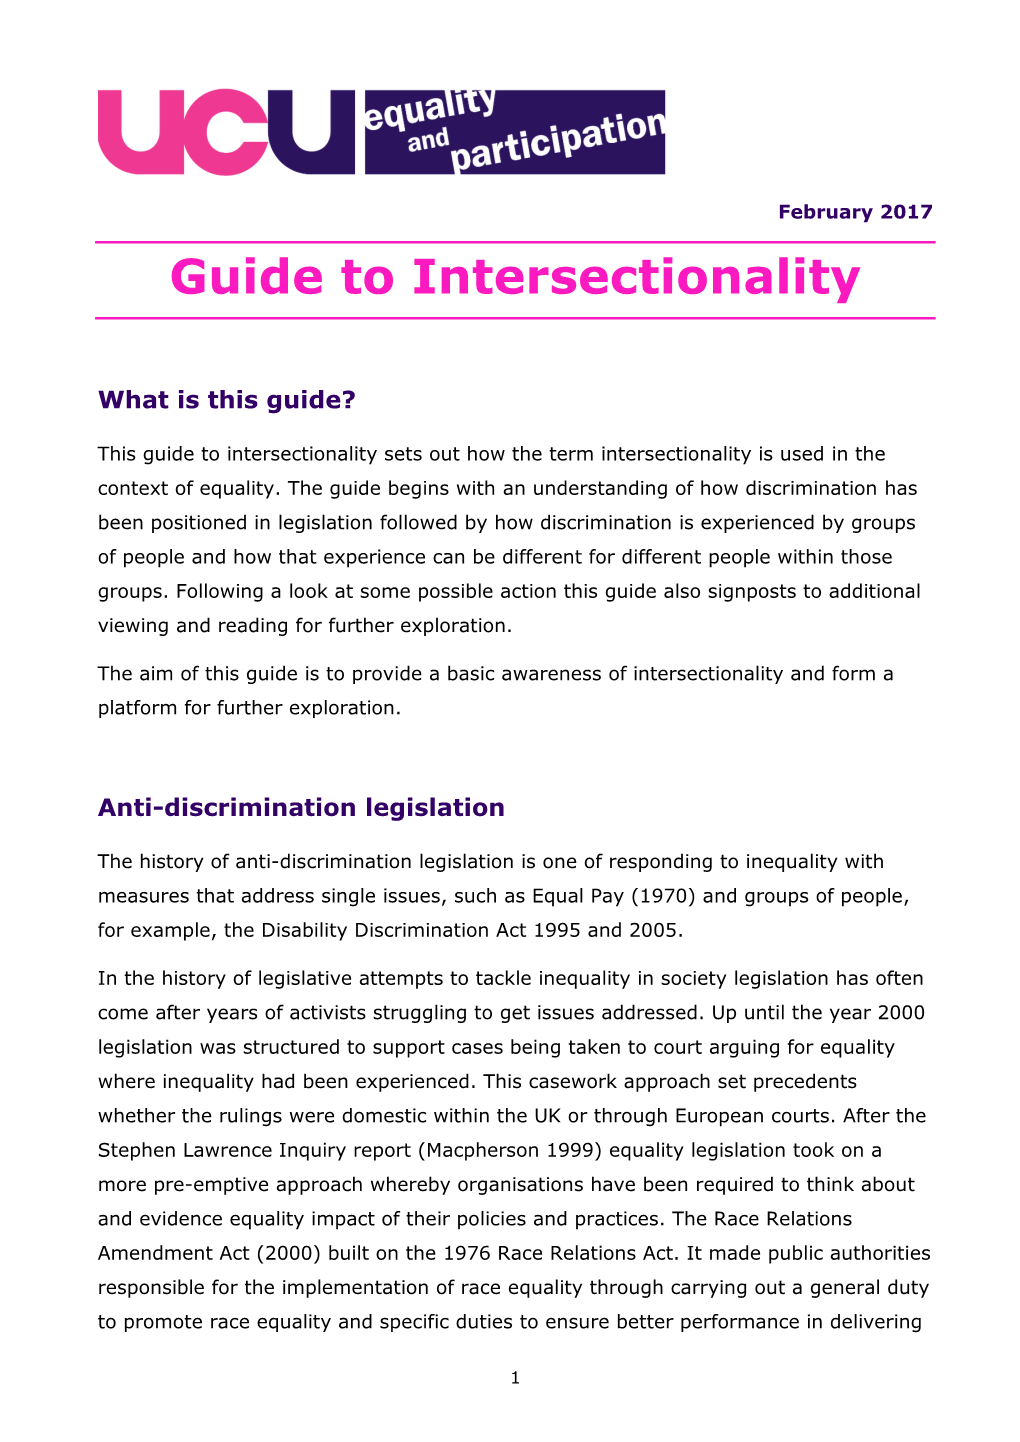 Guide to Intersectionality